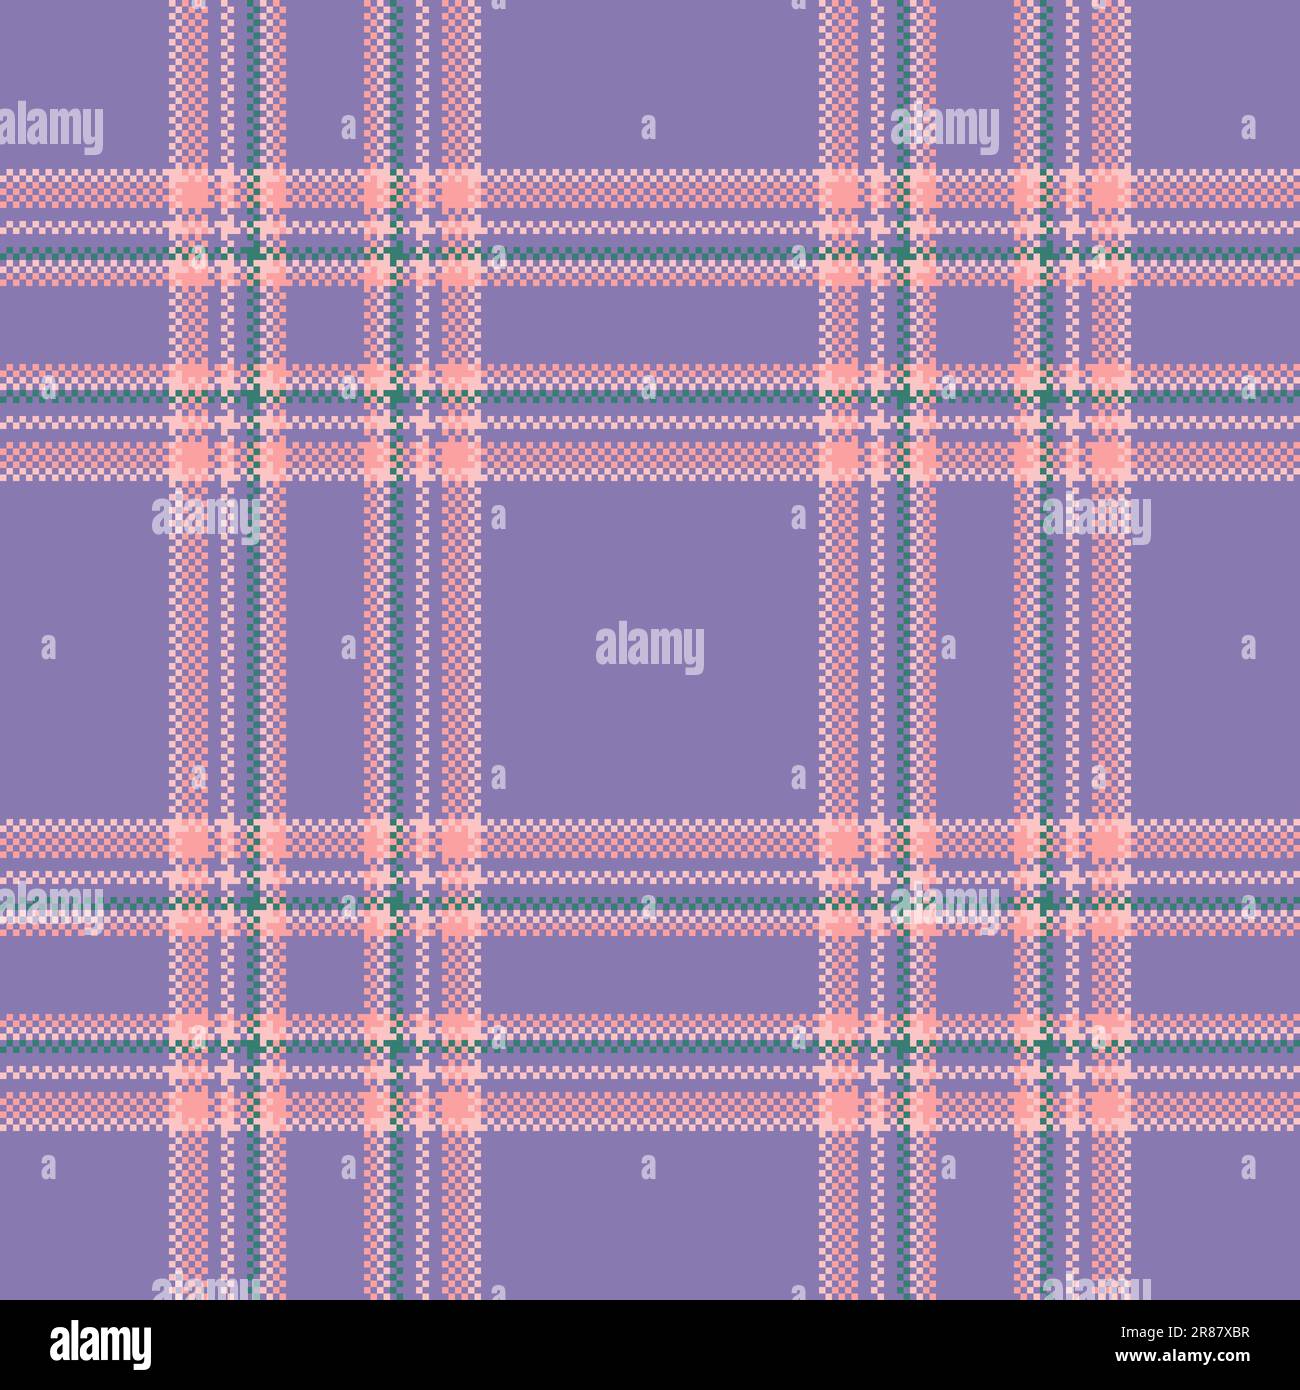 Fabric texture seamless of vector plaid pattern with a check tartan background textile in indigo and light colors. Stock Vector